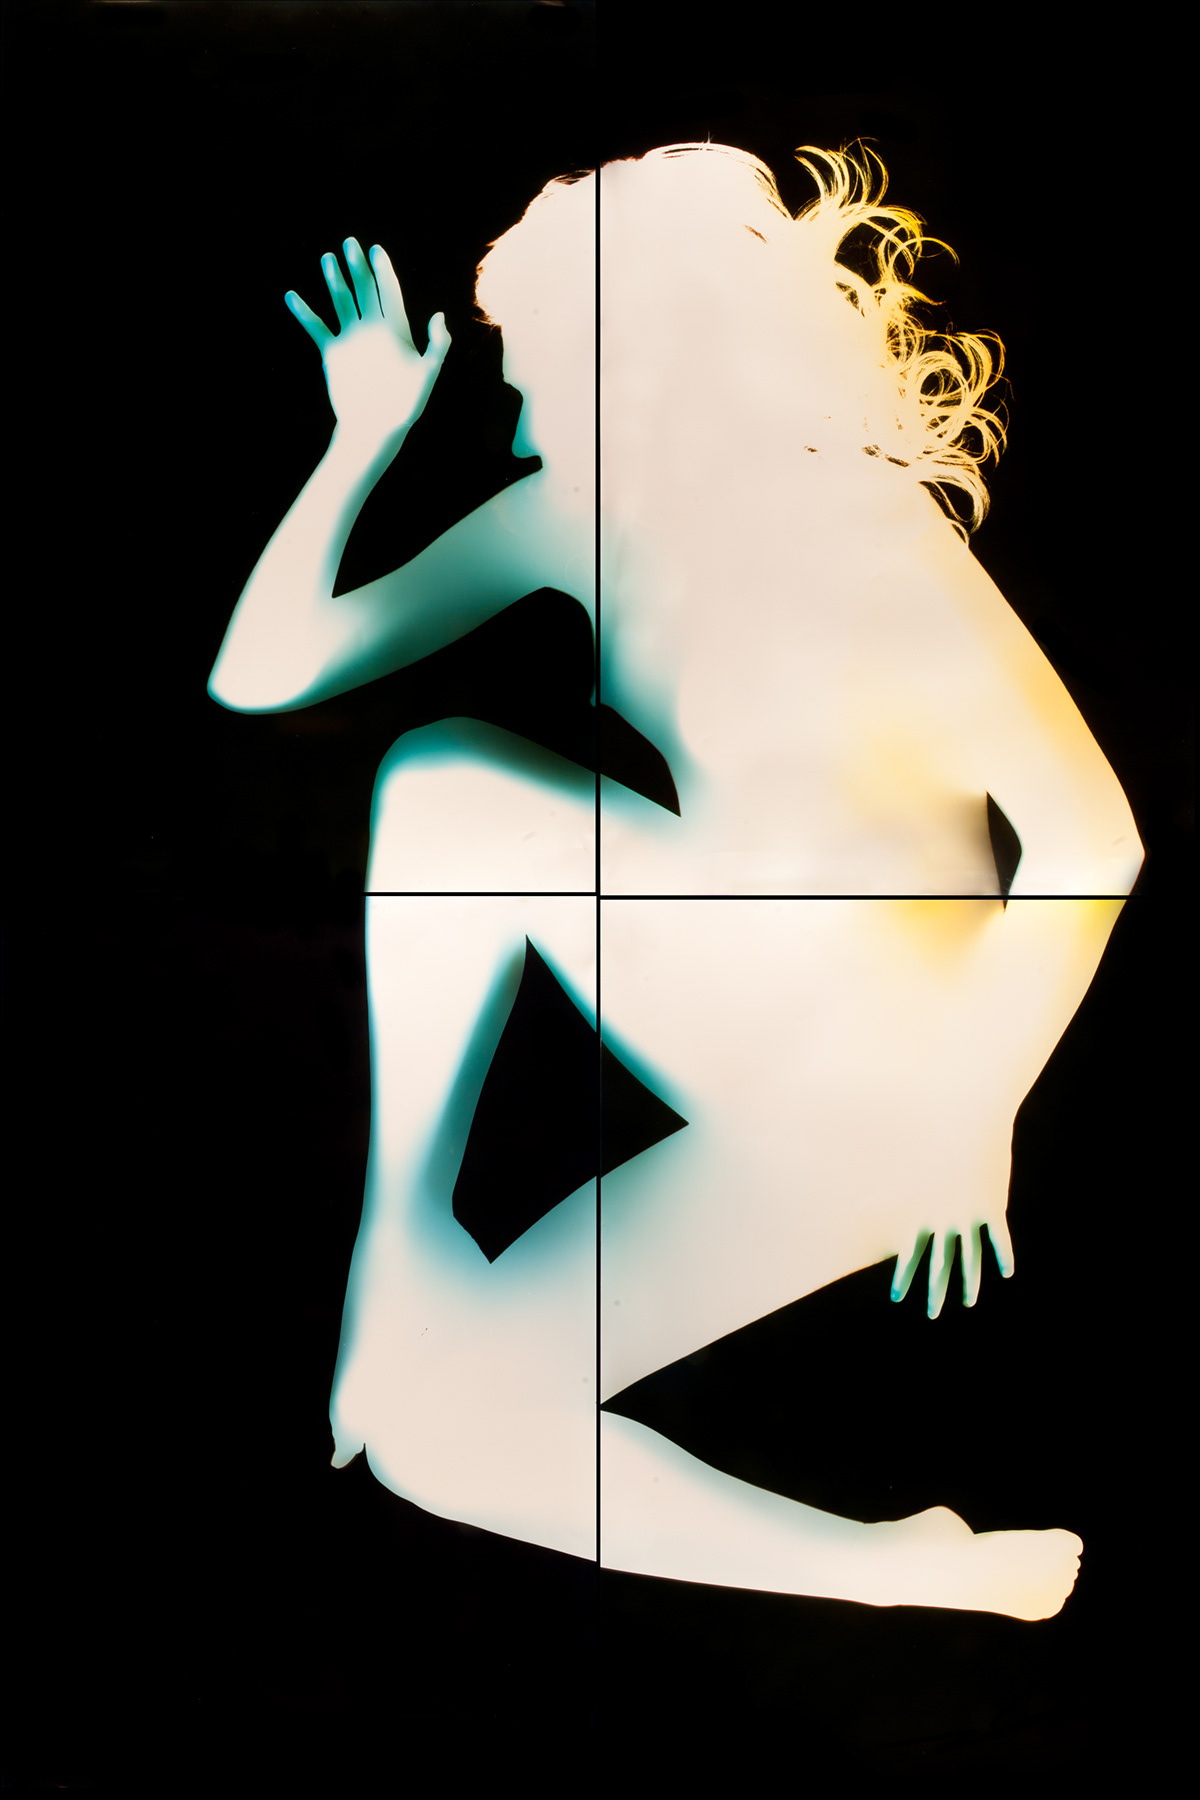 Contact Prints contact c-print figure risd large scale 1/1 Analouge darkroom color nude